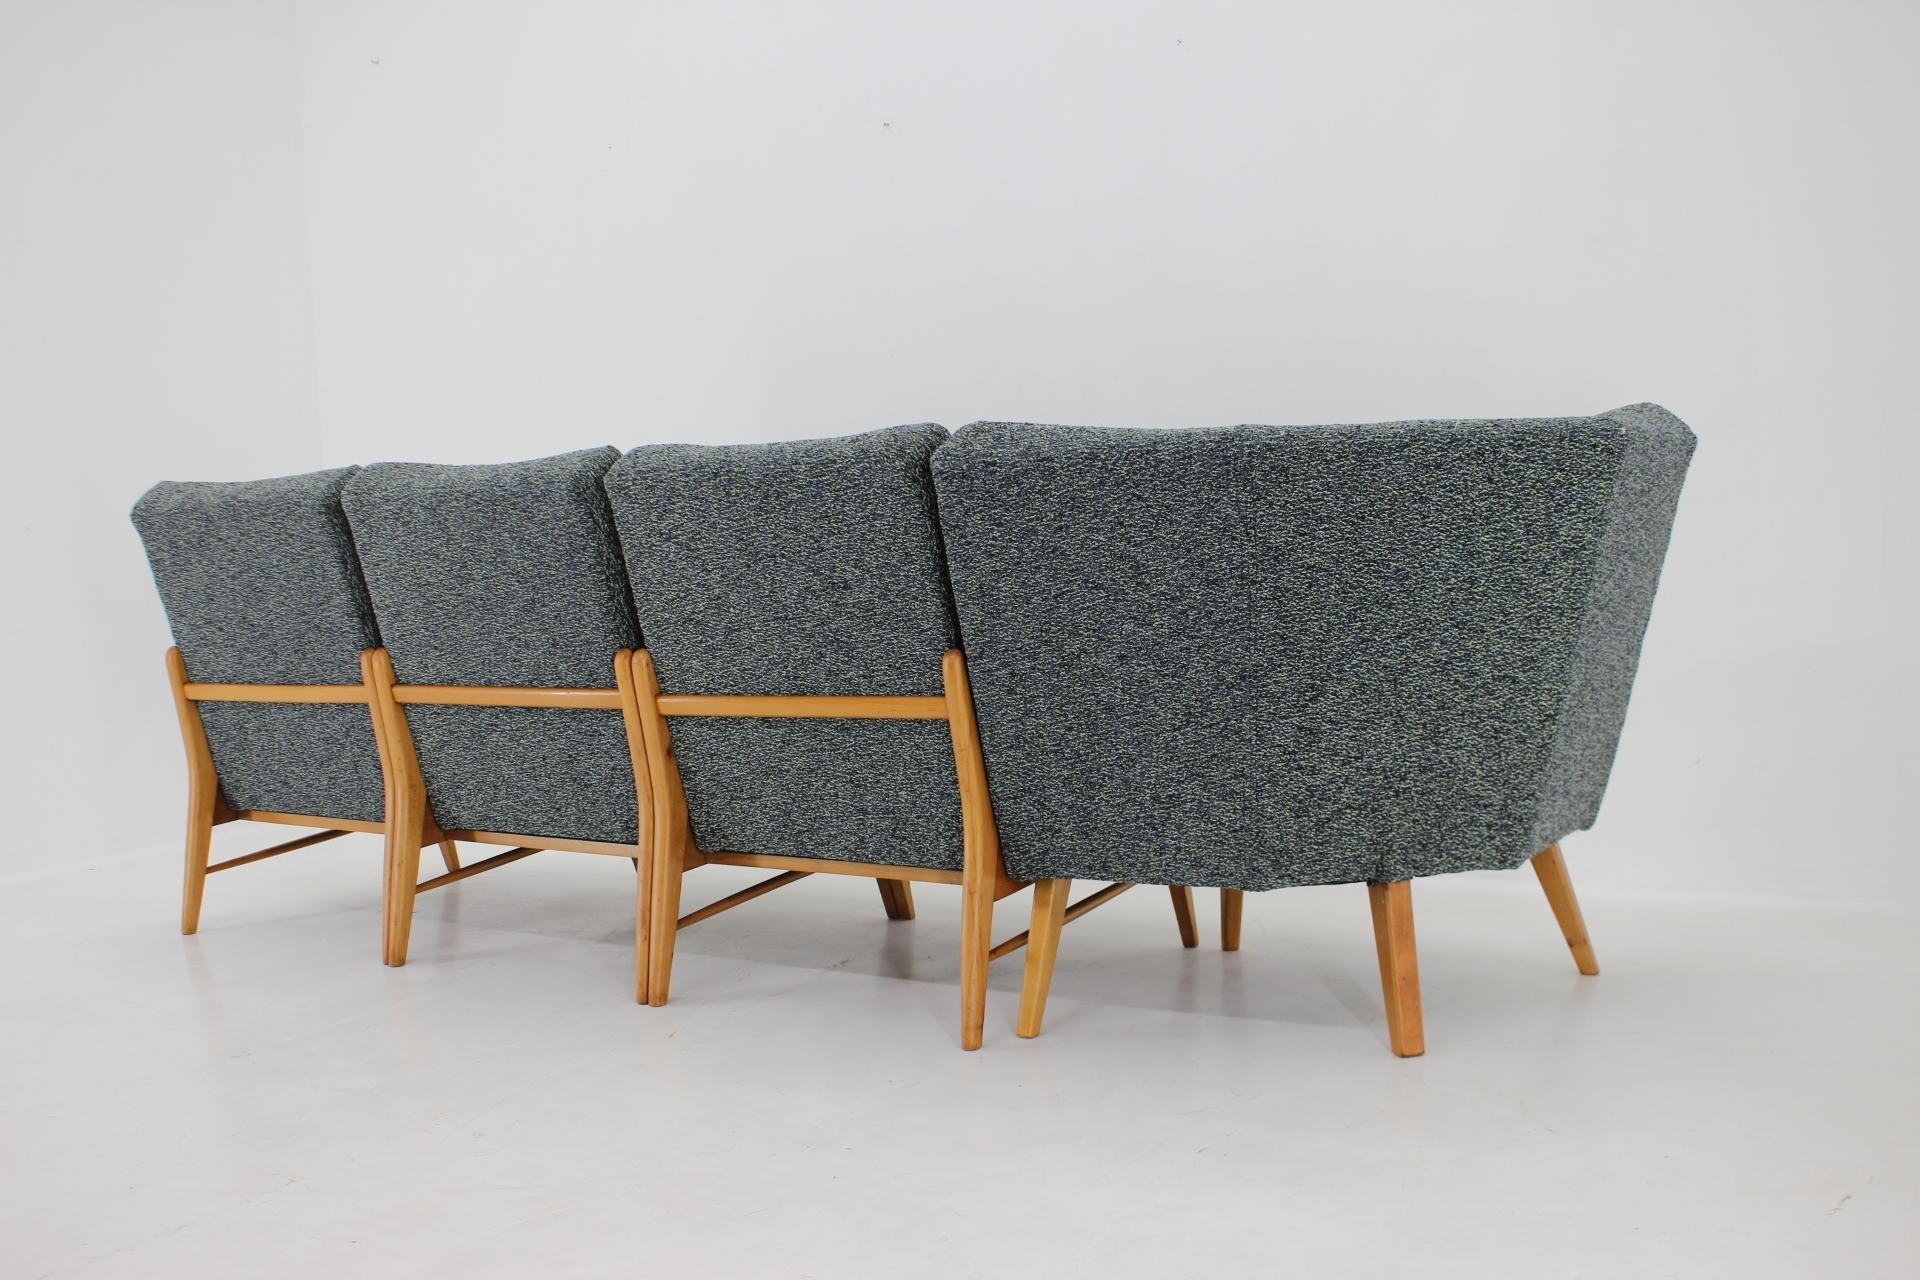 1970s Modular Sofa or Chairs in Beech wood and Kirgby Fabric, Czechoslovakia For Sale 3